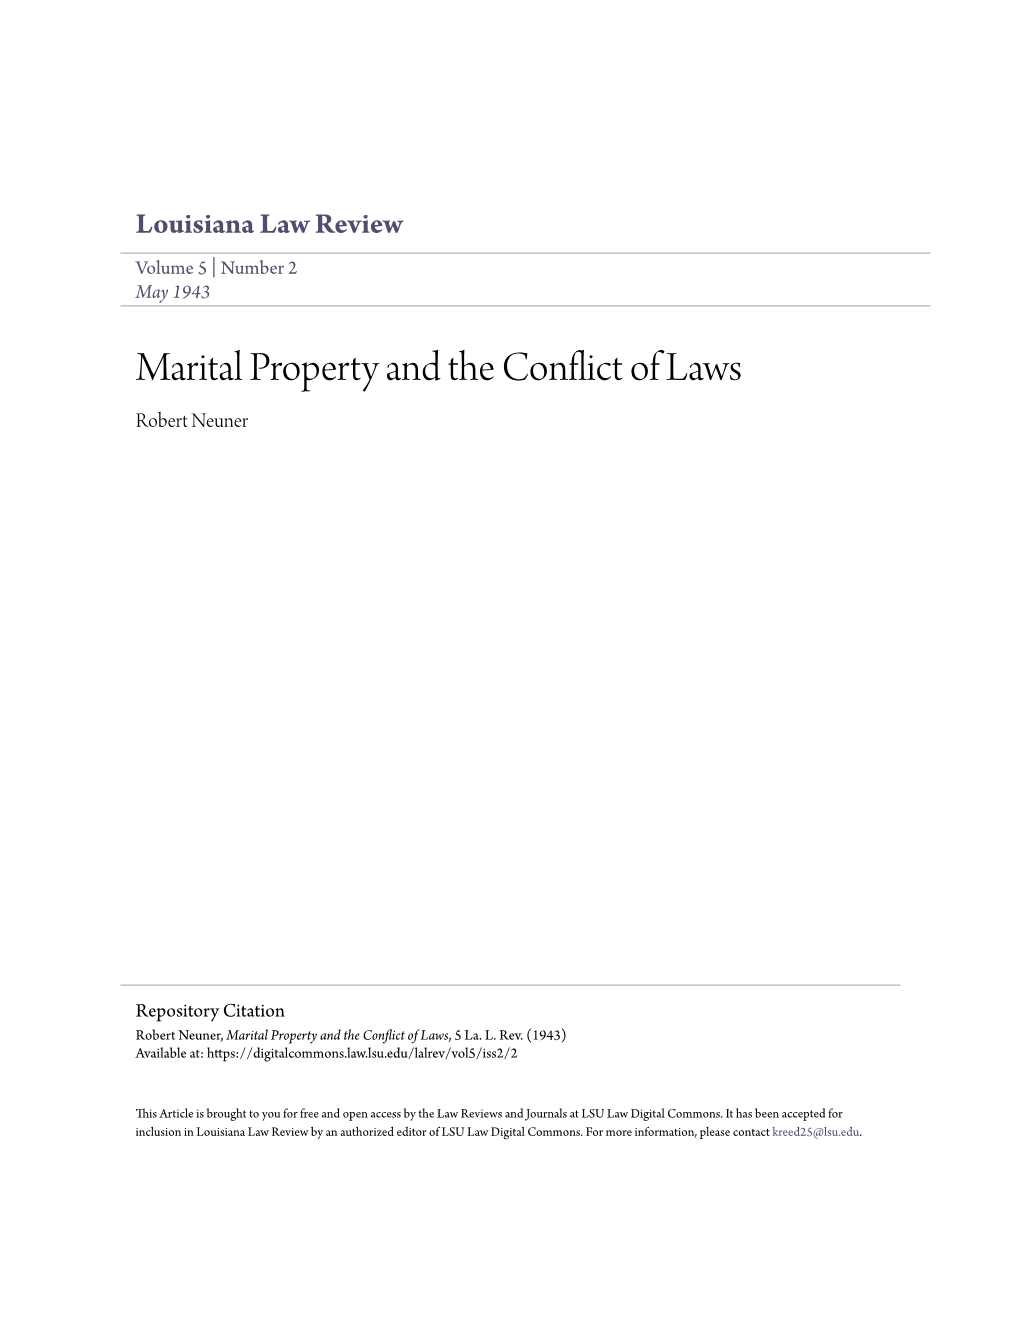 Marital Property and the Conflict of Laws Robert Neuner